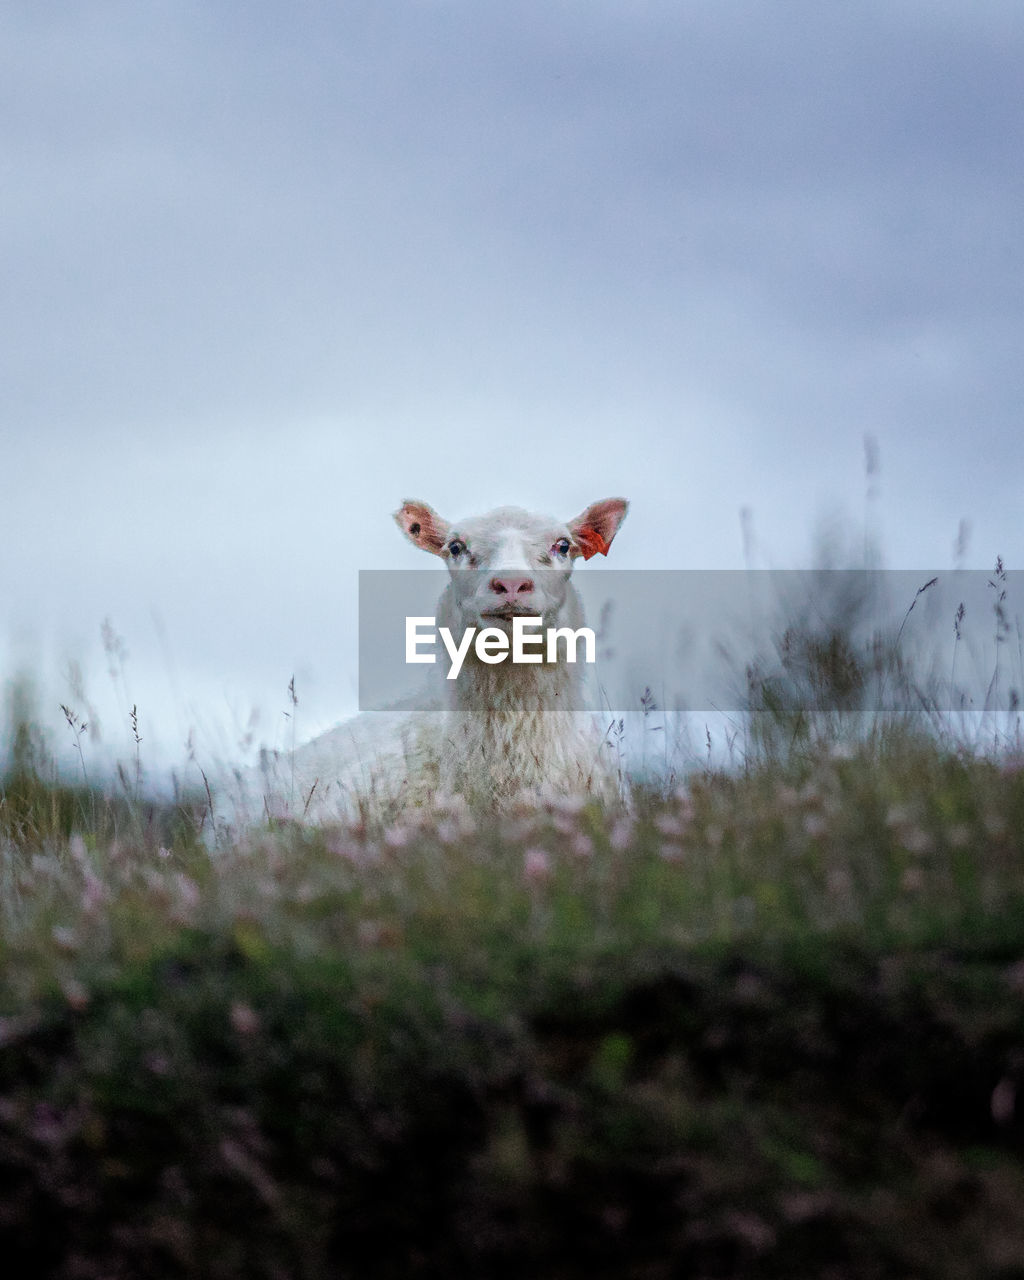 PORTRAIT OF SHEEP STANDING ON FIELD